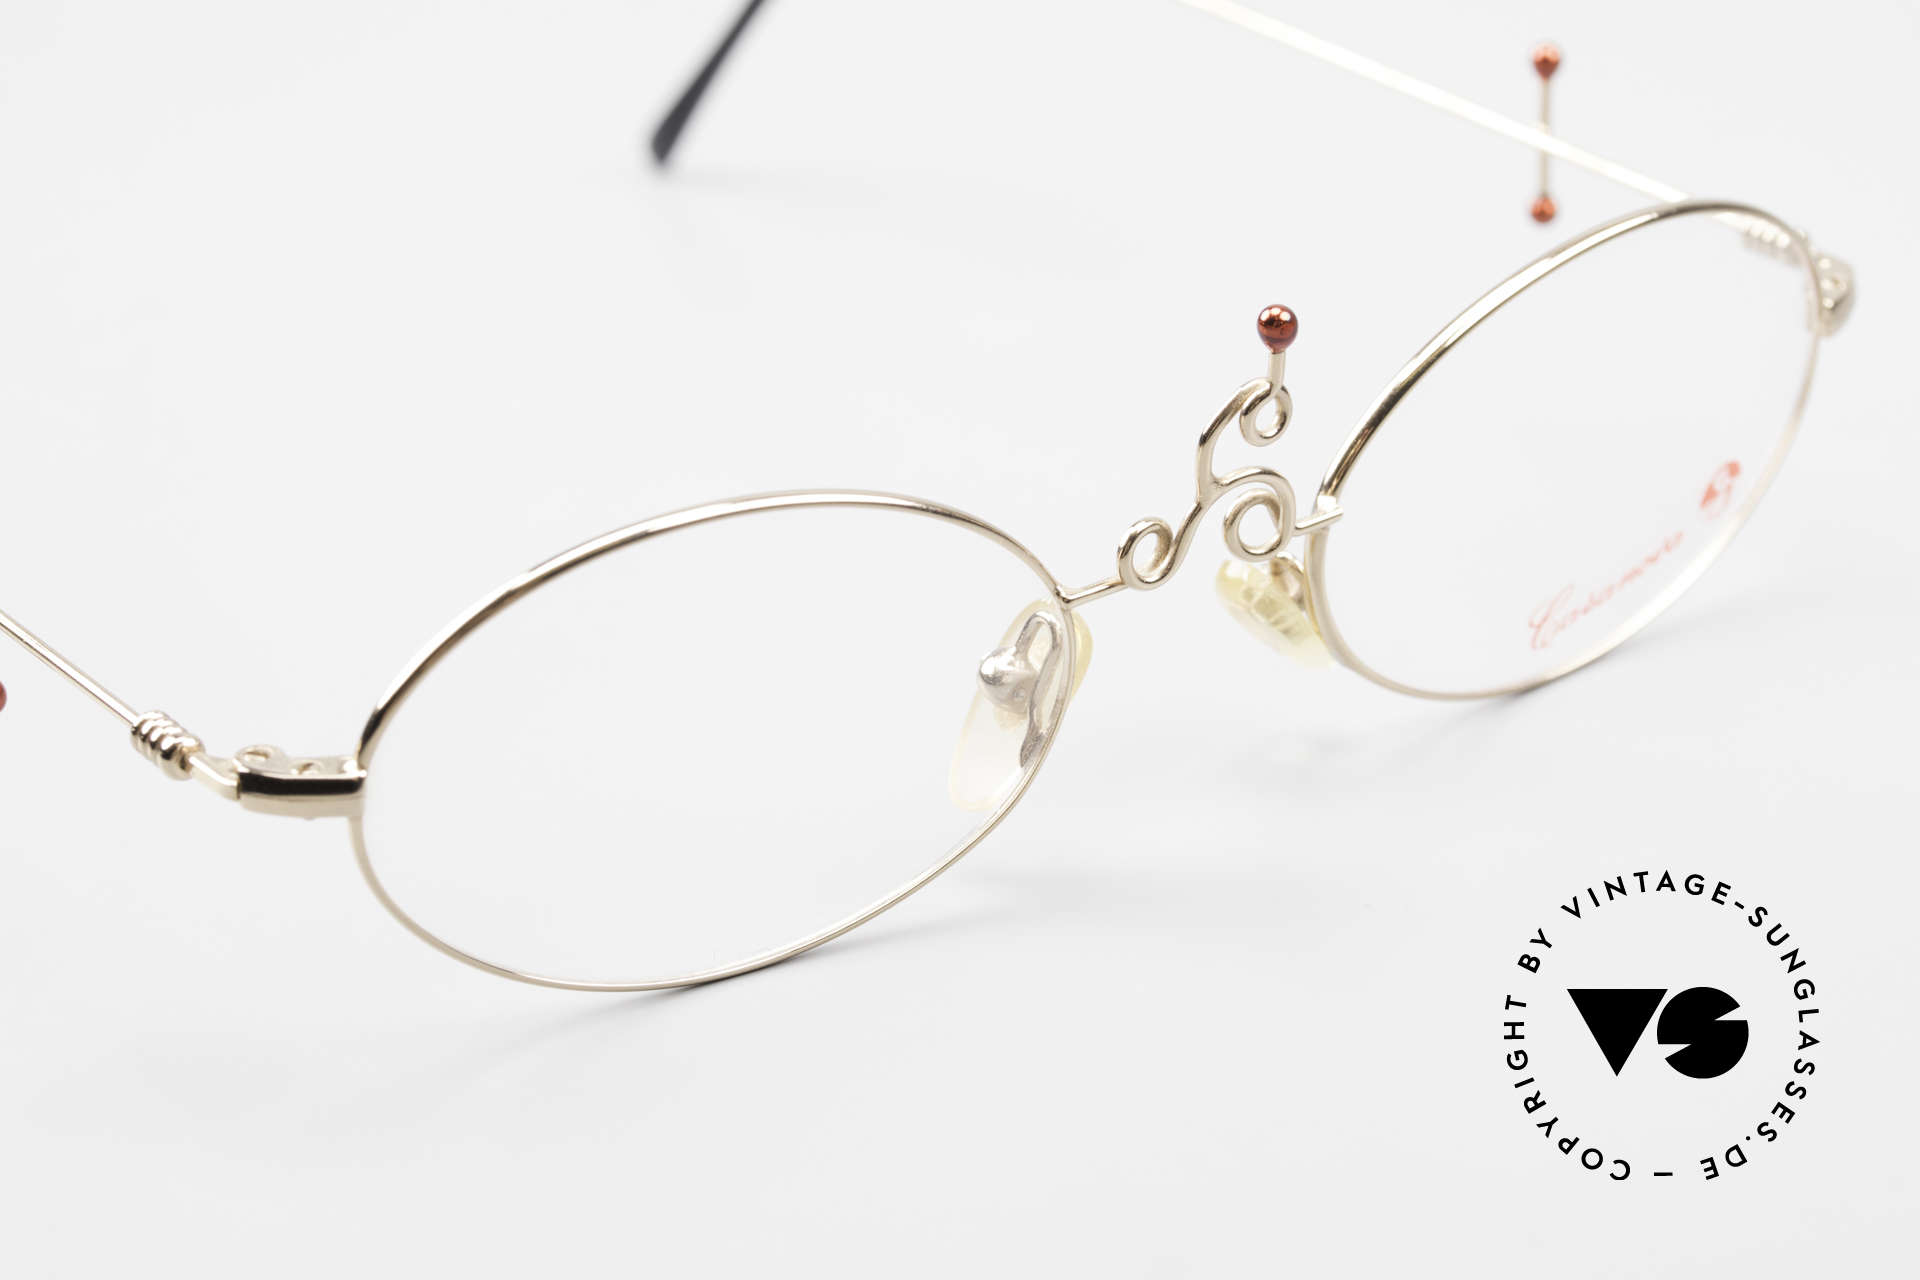 Casanova Arché 1 Art Glasses 80's Gold Plated, the metal frame can be glazed optionally (optical / sun), Made for Women